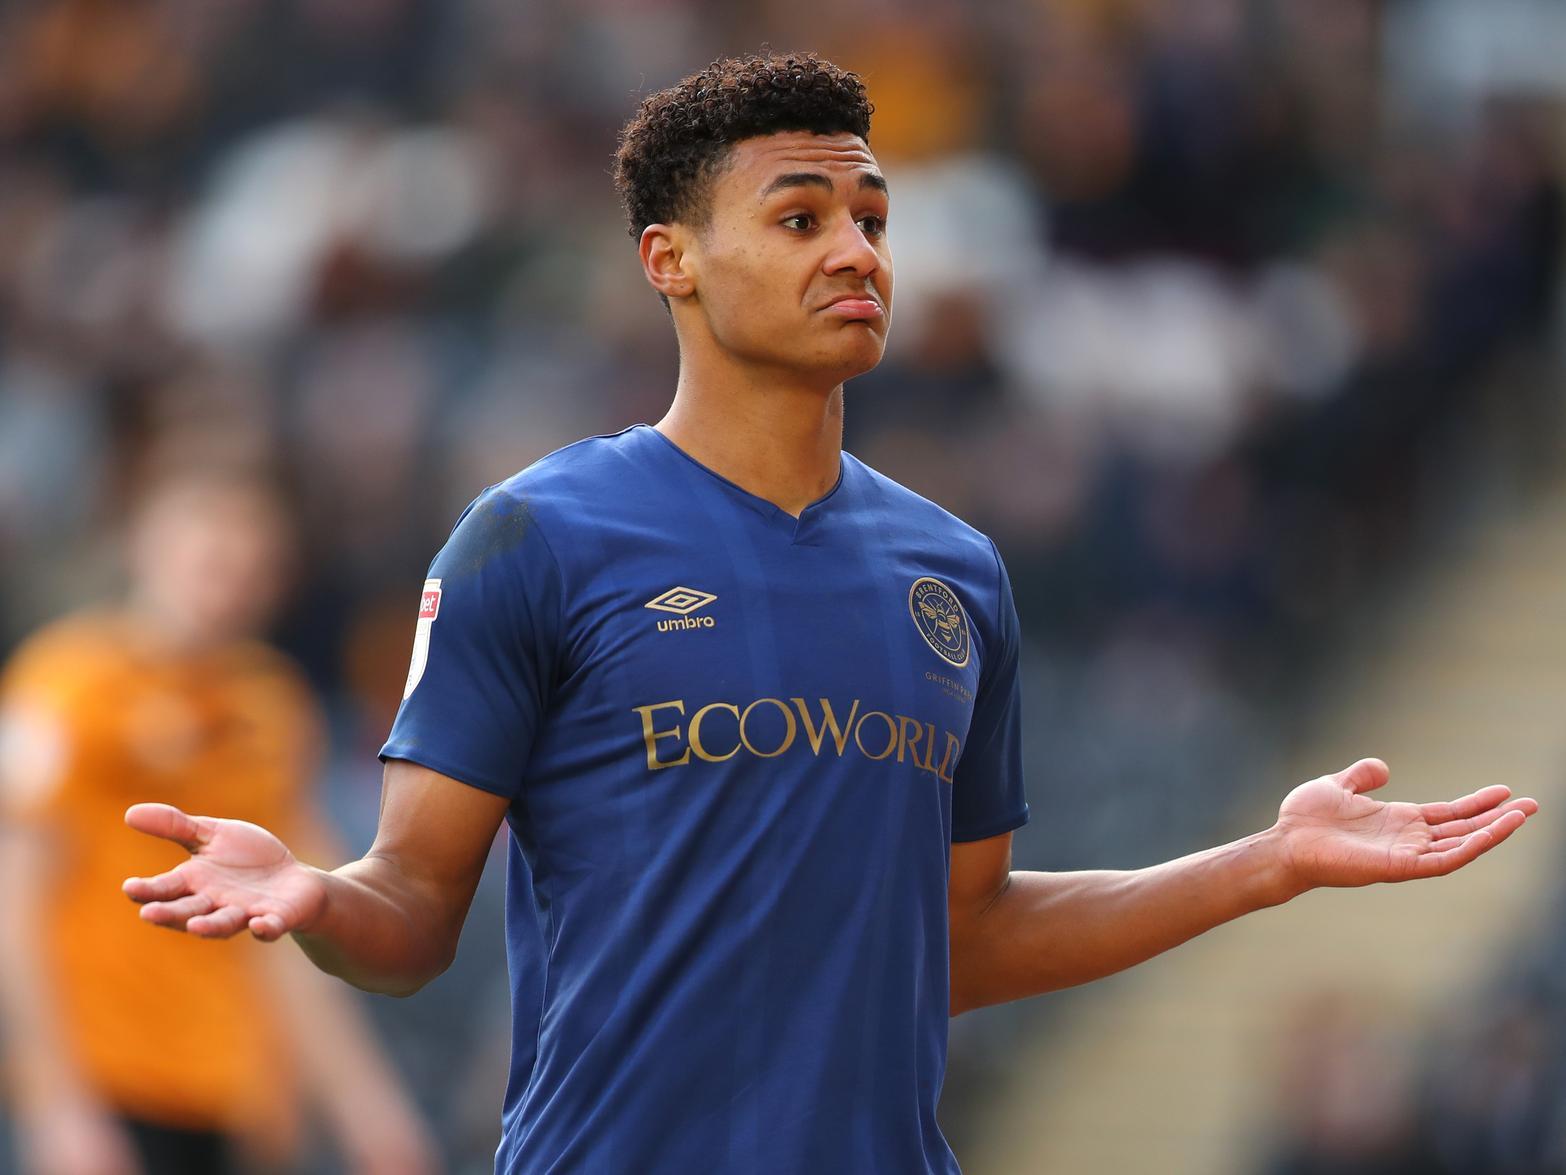 Football pundit Kevin Phillips has branded Brentford talisman Ollie Watkins a "clinical finisher" and given him high praise for stepping up to fill the boots of striker Neal Maupay, who joined Brighton last summer. (HITC)